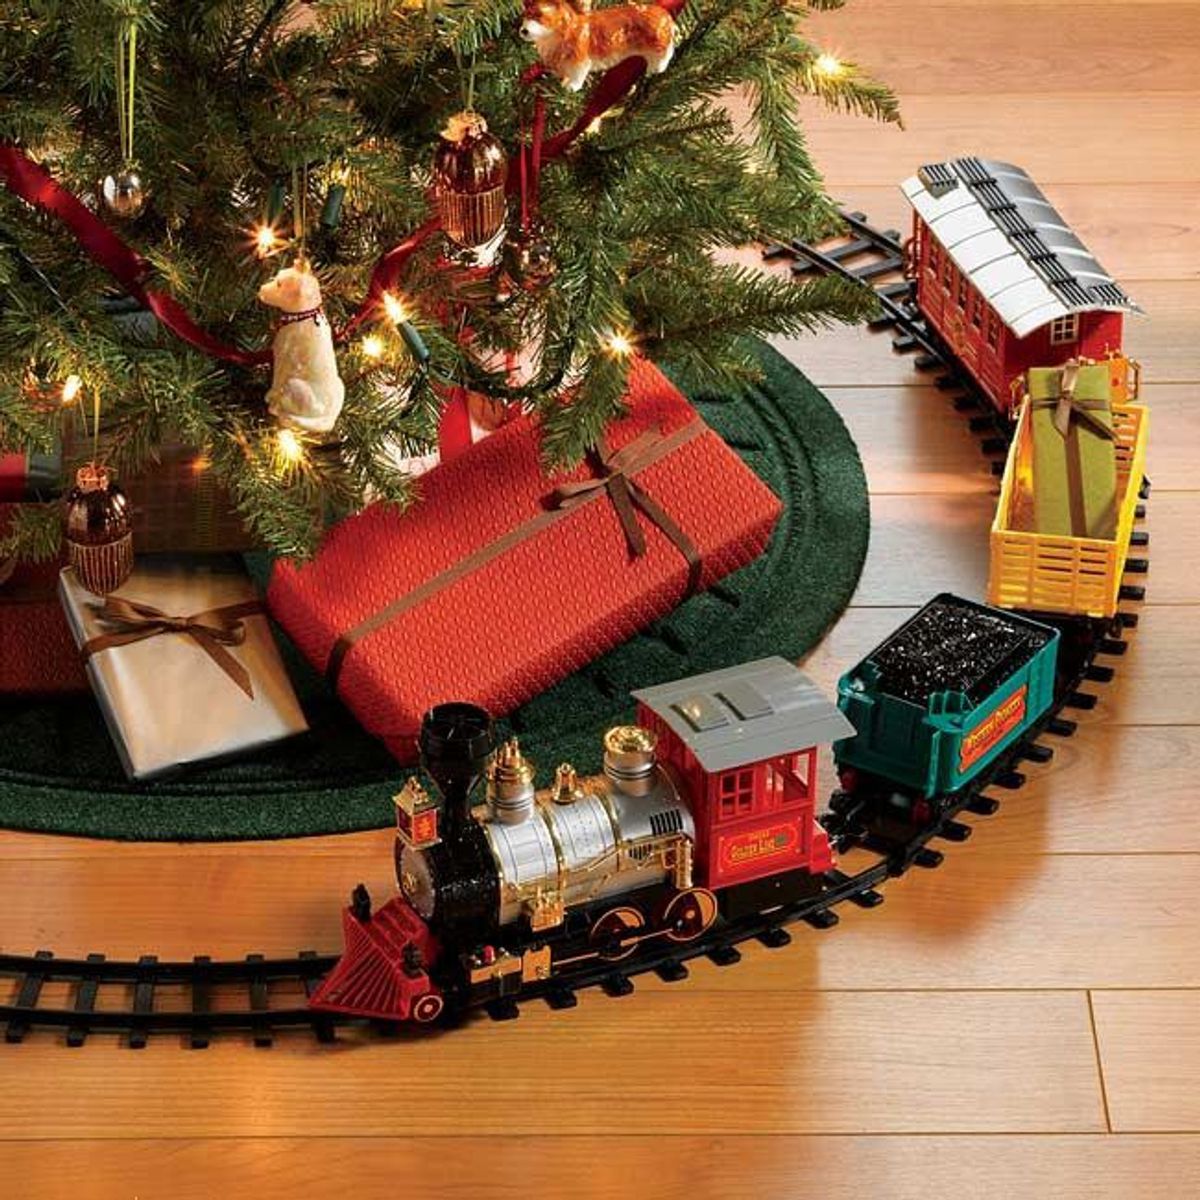 5 Christmas Toys That Many Will Remember